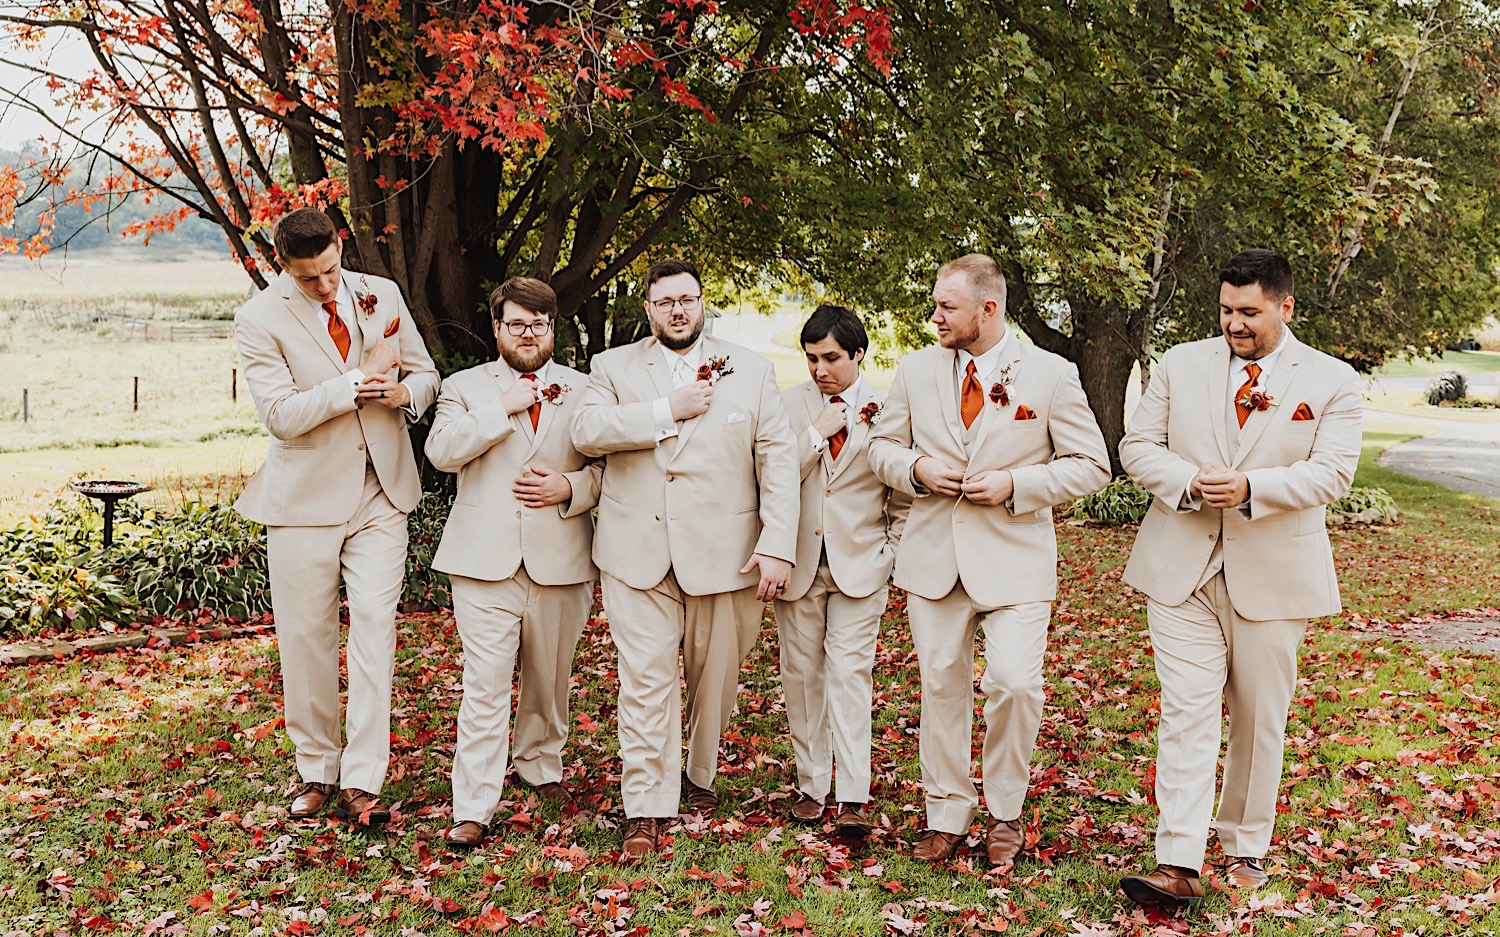 A groom and his groomsmen walk towards the camera together while adjusting their suit coats, photo taken by a Minneapolis Wedding Photographer